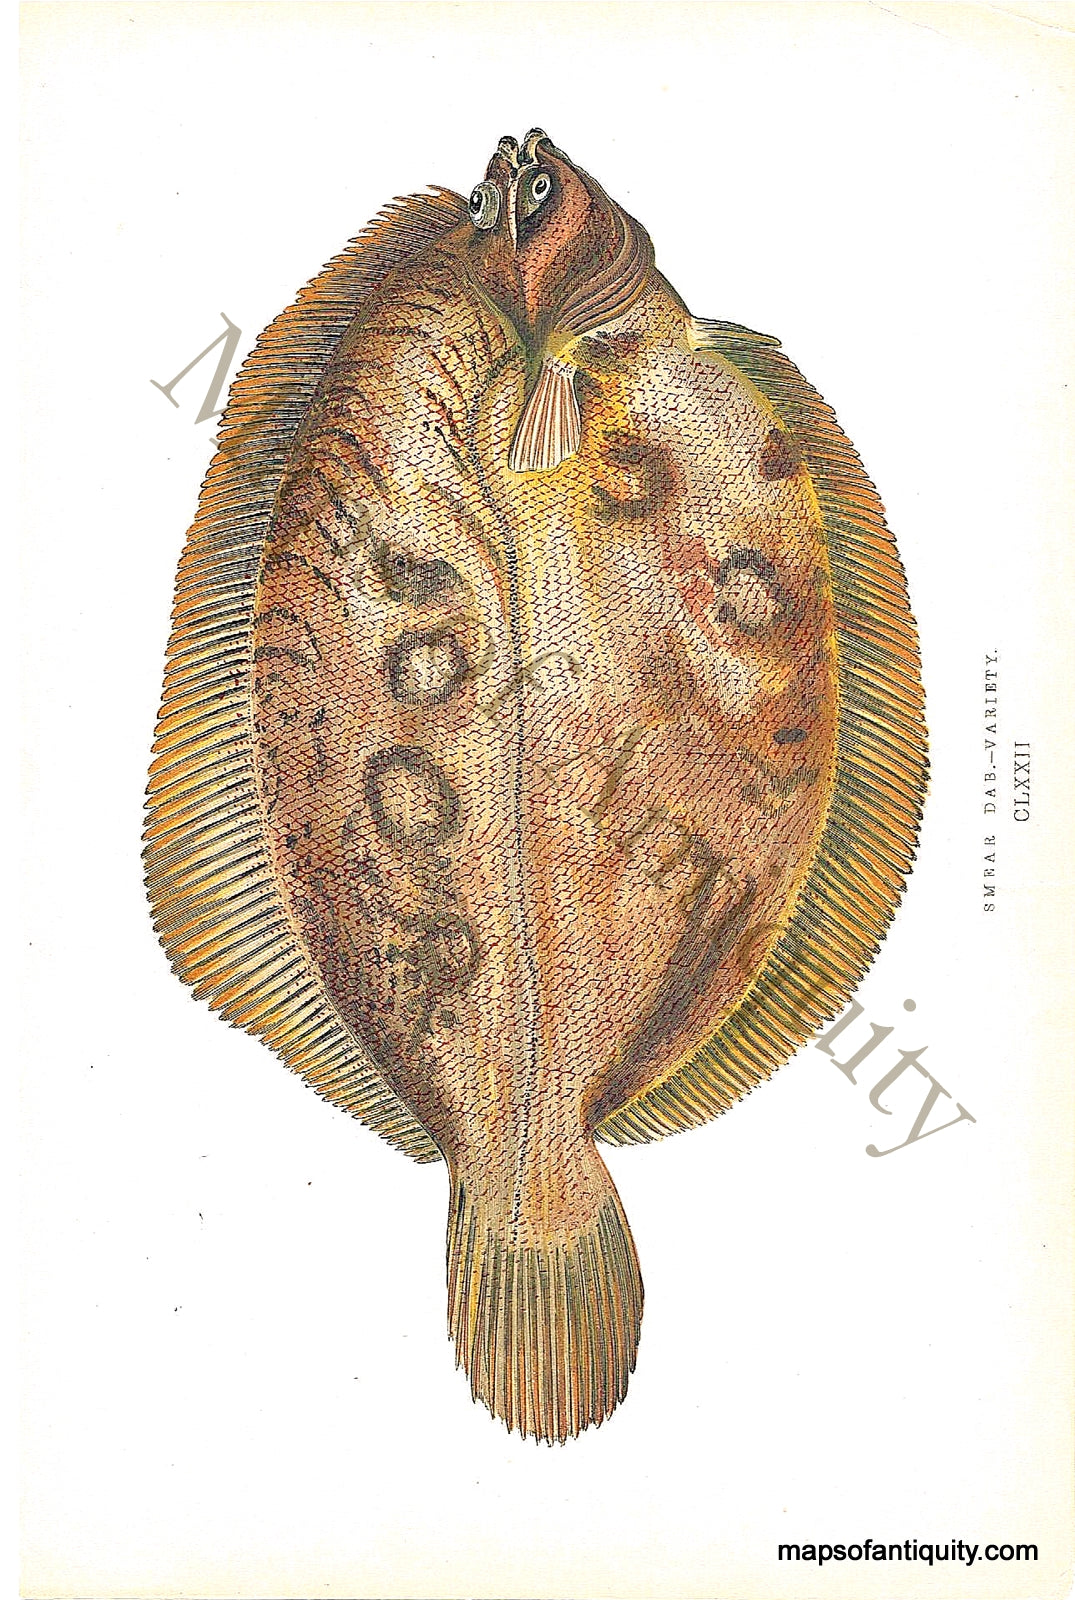 Chromolithograph-Smear-Dab---Flounder-Natural-History-Prints-Fish-1877-Couch-Maps-Of-Antiquity